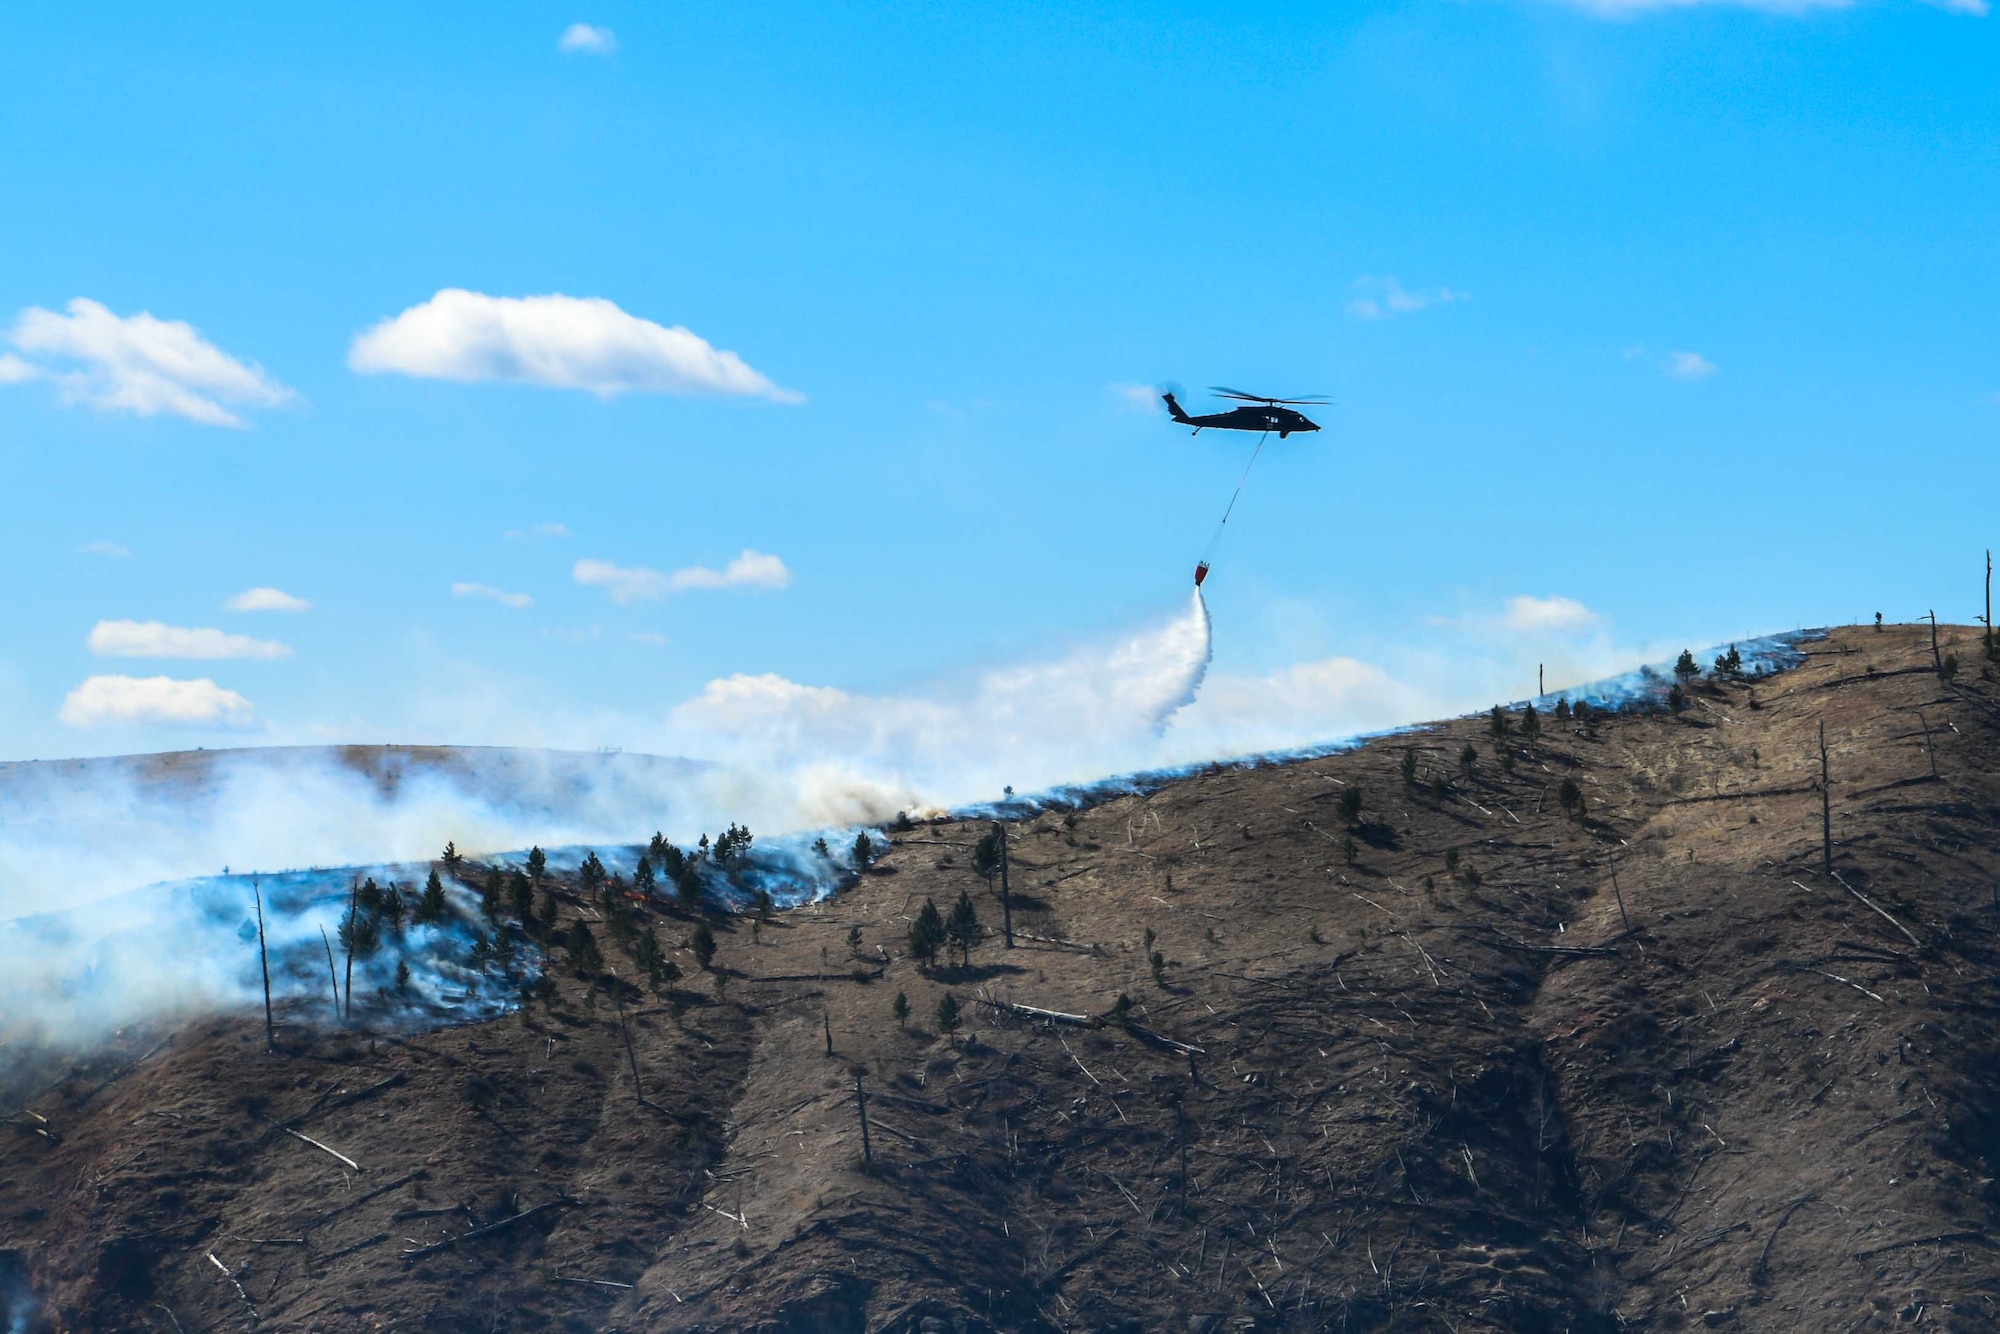 Hawk helicopter drops water from its bucket to help fight Schroeder’s Fire in Rapid City, S.D., March 30, 2021. The fire started March 29 in the Black Hills four miles west of Rapid City.